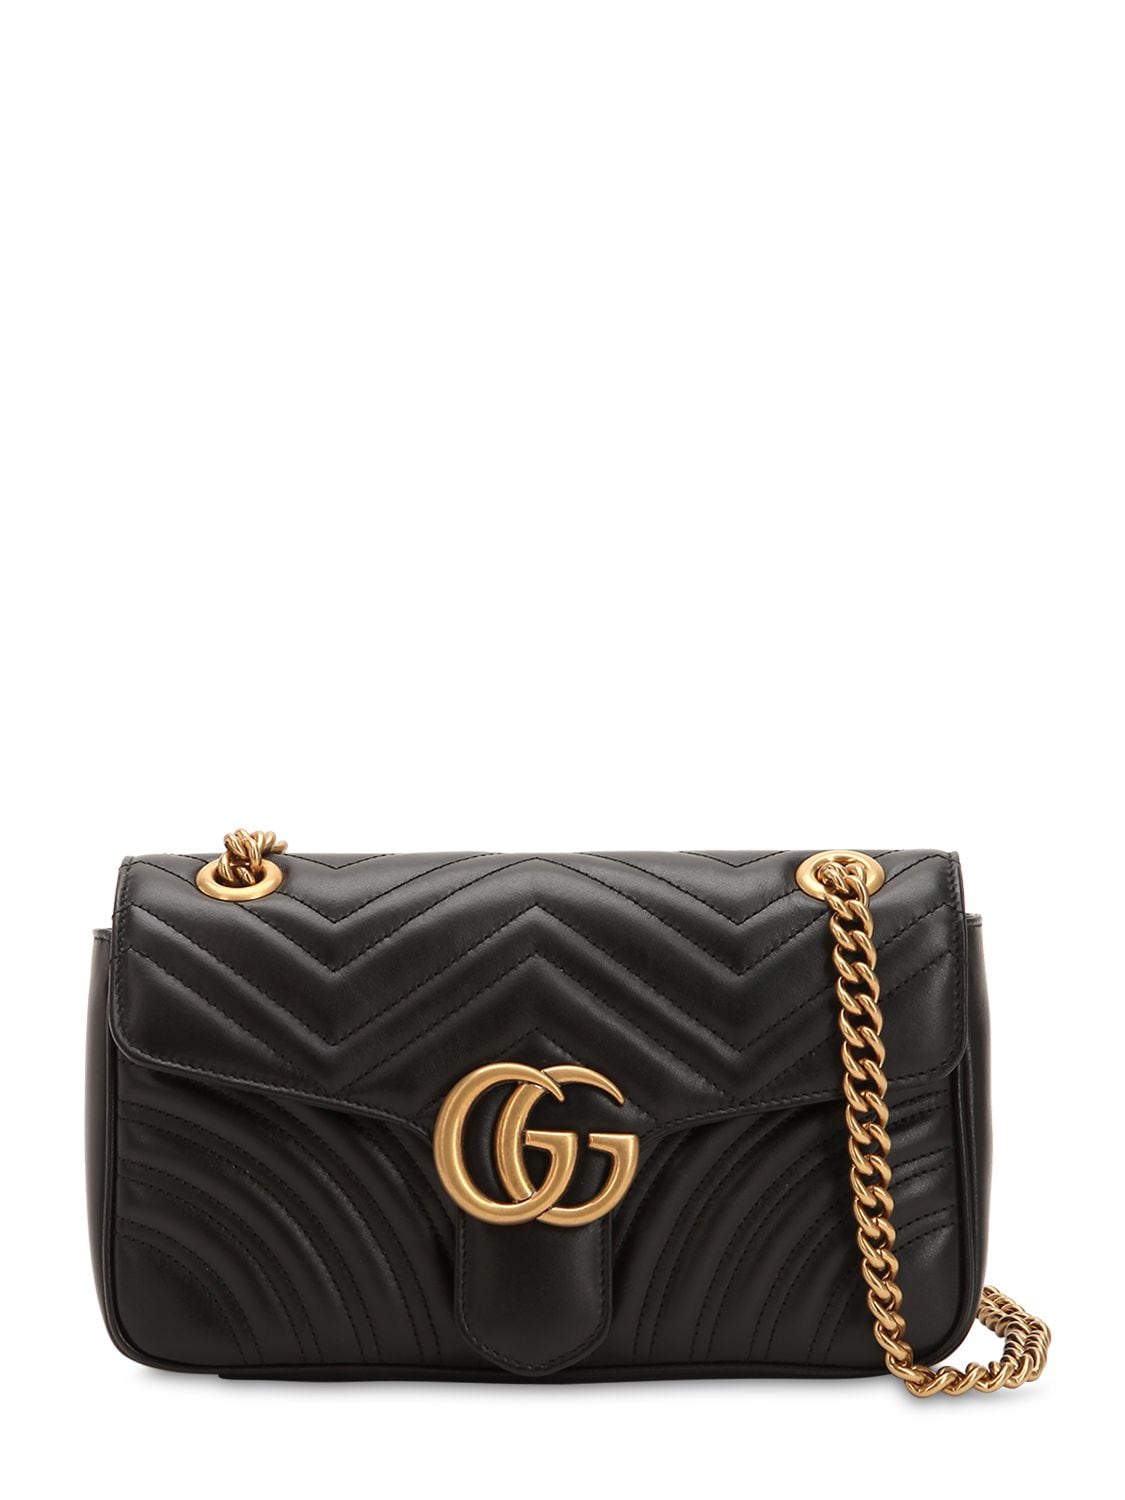 Image of Small Gg Marmont 2.0 Leather Bag